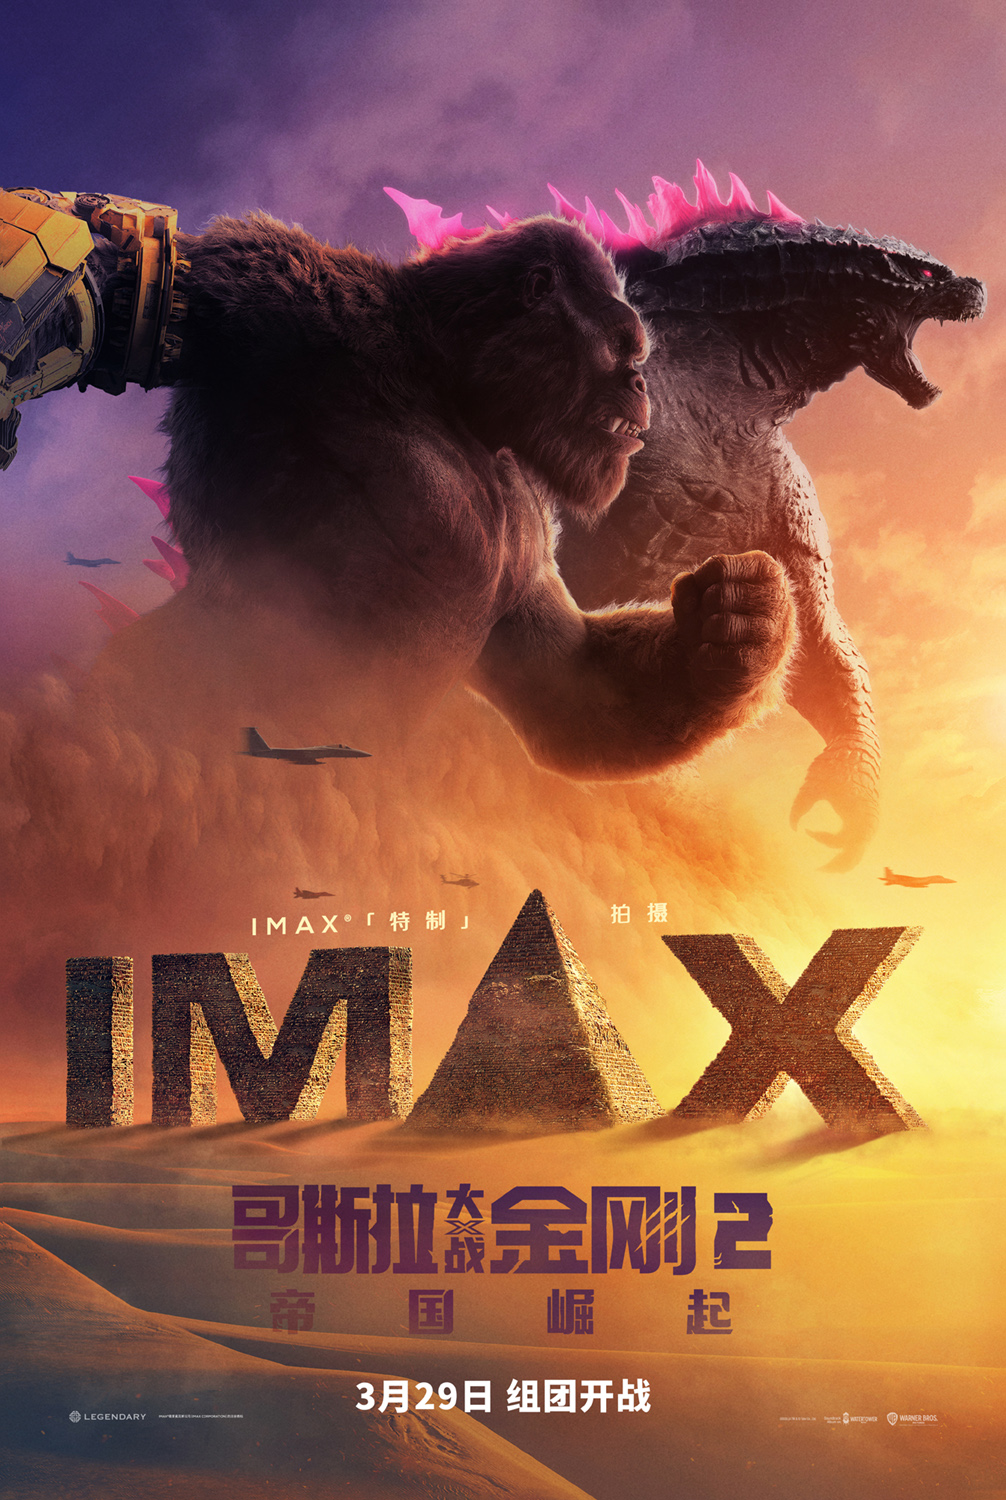 The new IMAX poster for the release of 